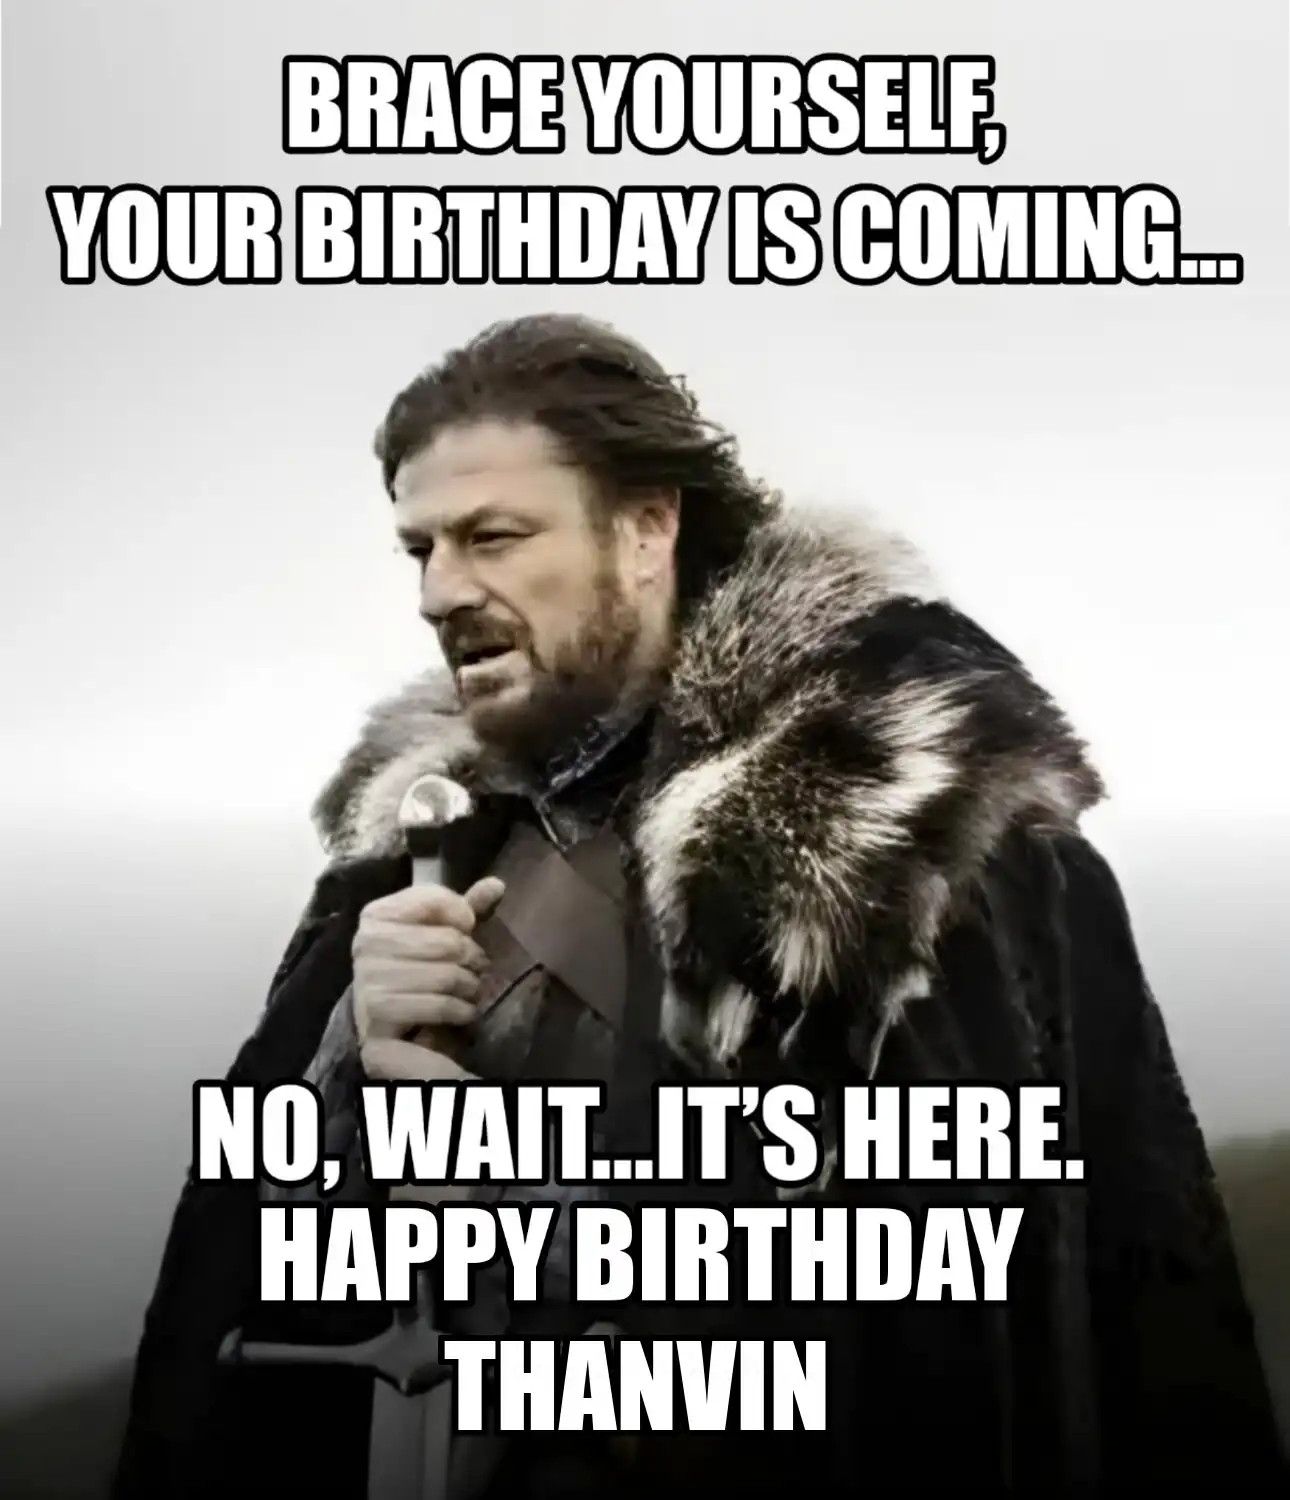 Happy Birthday Thanvin Brace Yourself Your Birthday Is Coming Meme